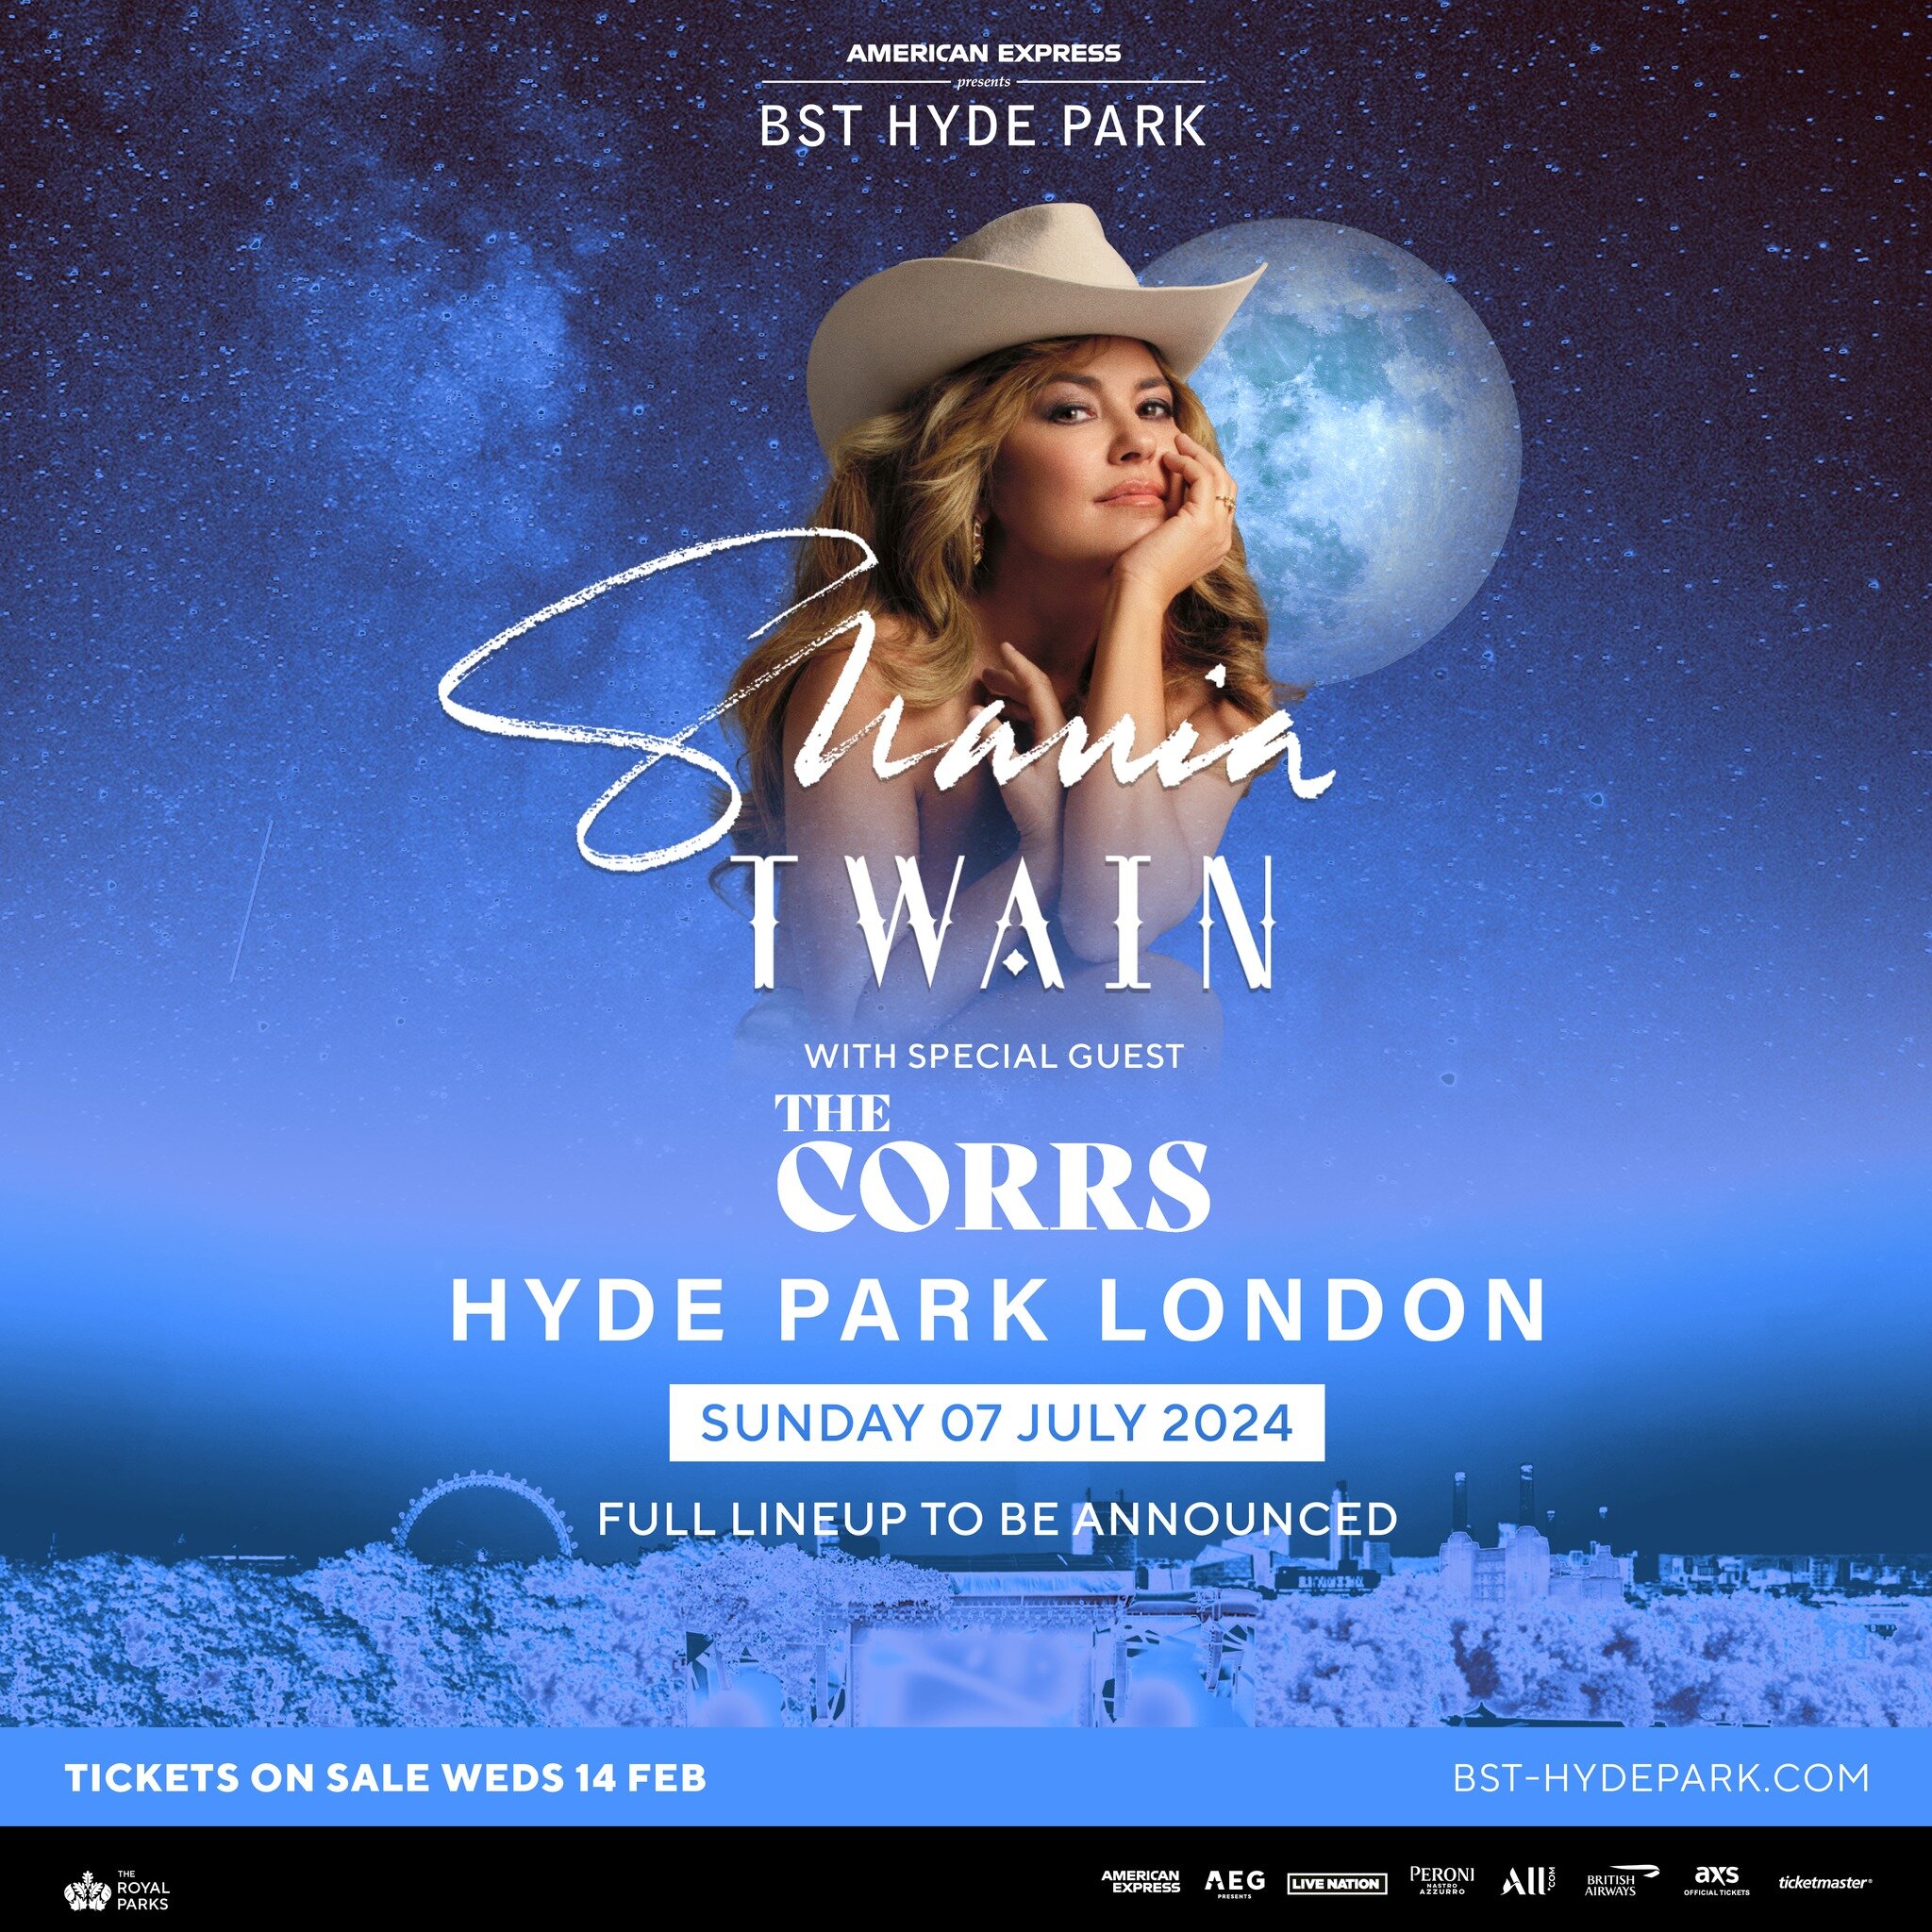 We're thrilled to announce we'll be joining @shaniatwain at @bsthydepark this summer 💃

Tickets go on sale 10am Weds 14th February. 

Full info and details of pre-sale via our website {link in bio}

@andreacorrofficial @carolinecorrofficial @jimcorr